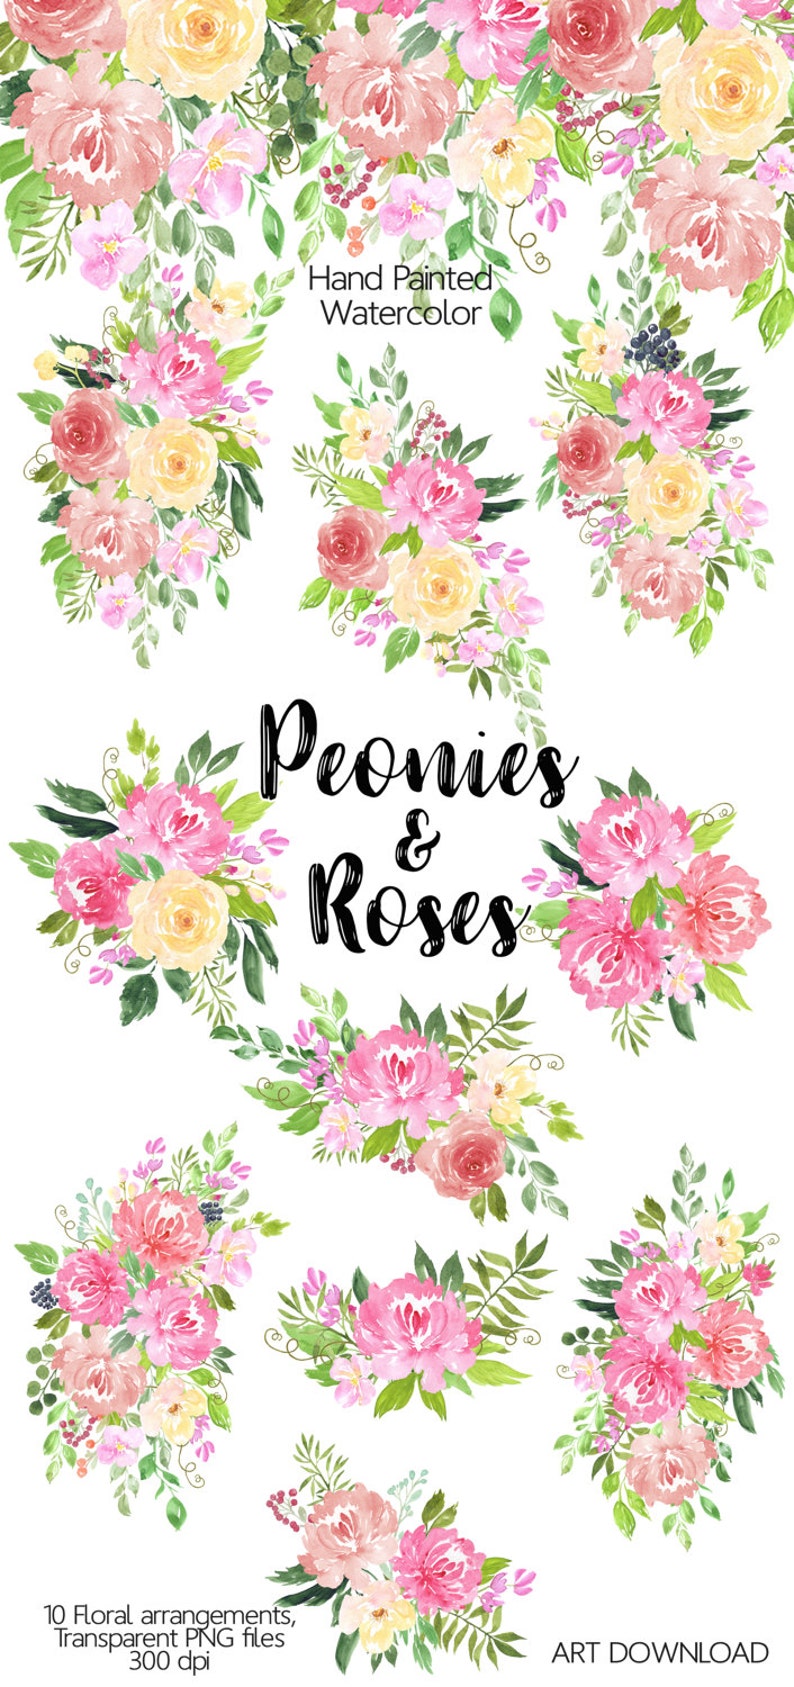 Watercolor Flower Clipart Peonies and Roses, Floral clipart, Hand painted clip art, Digital clipart, Flower watercolor png, Floral border image 3